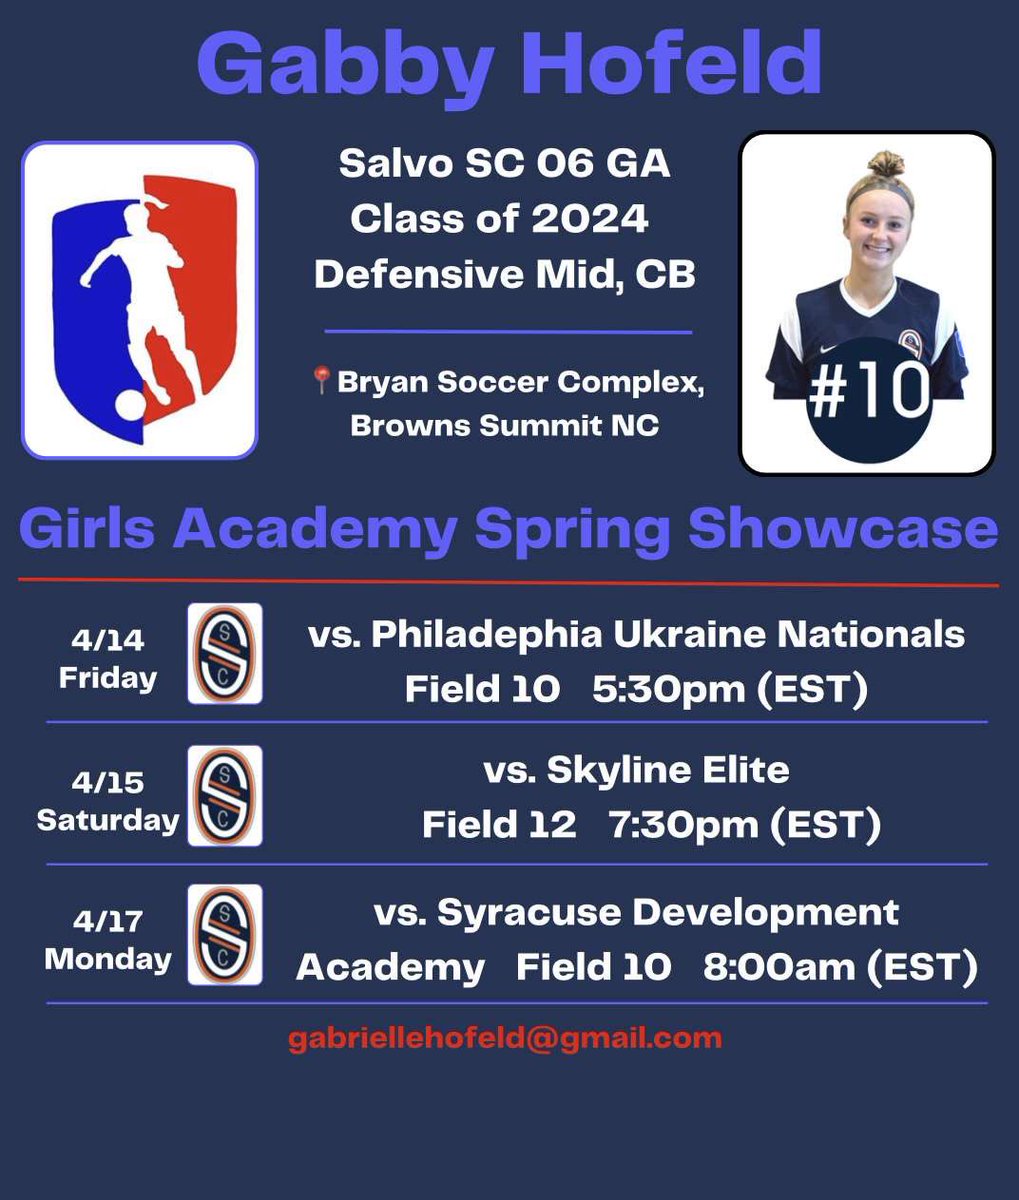 Come watch my team and I play in Greensboro, North Carolina next weekend! #girlsacademy #GAspringshowcase